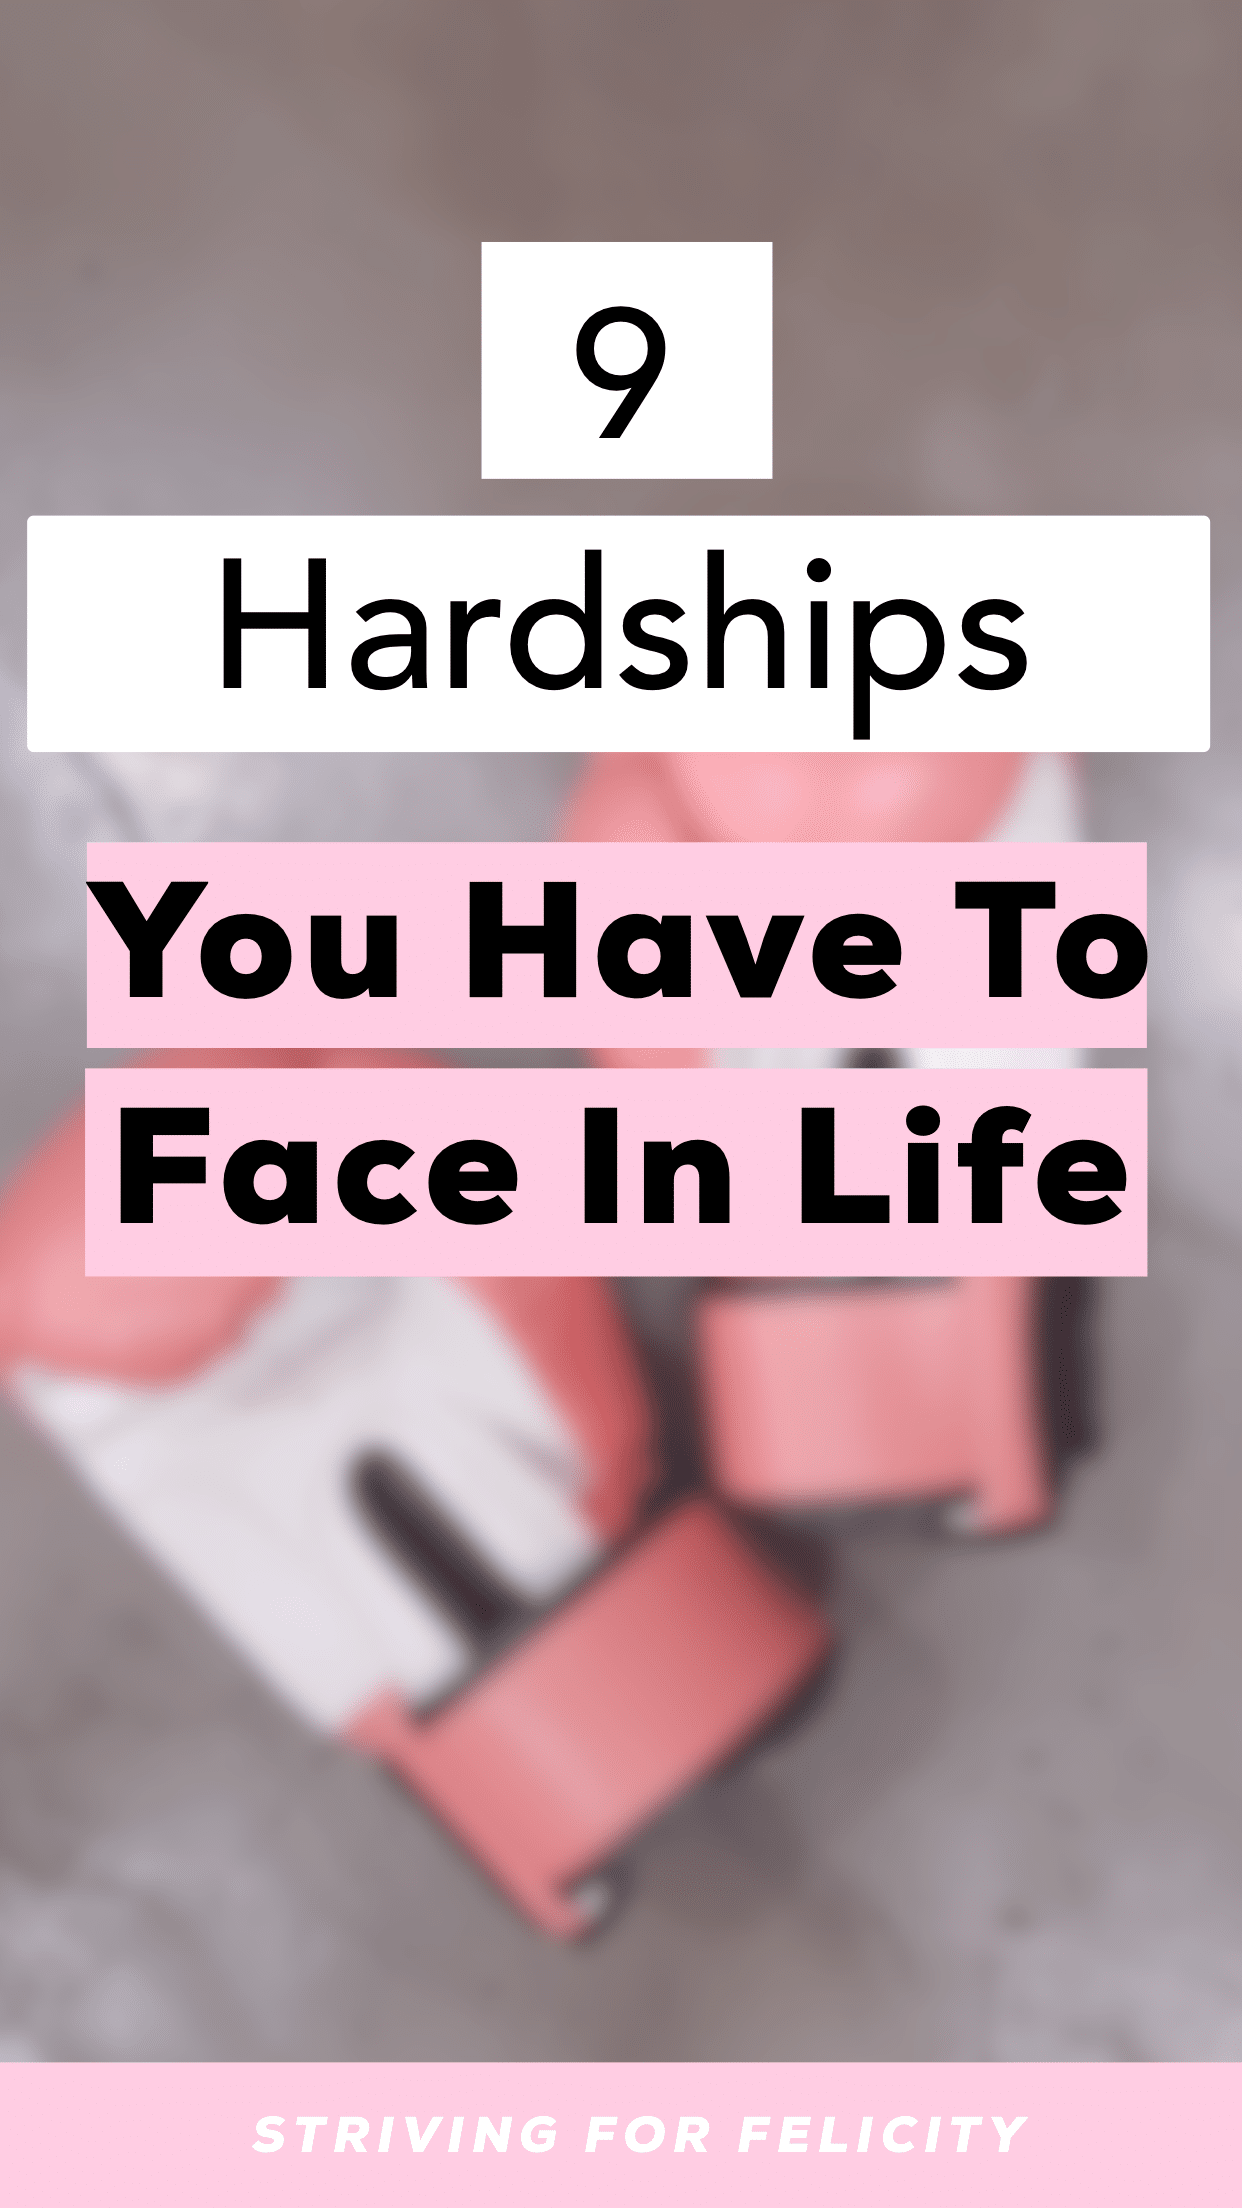 Striving for Felicity 9 hardships you have to face in life